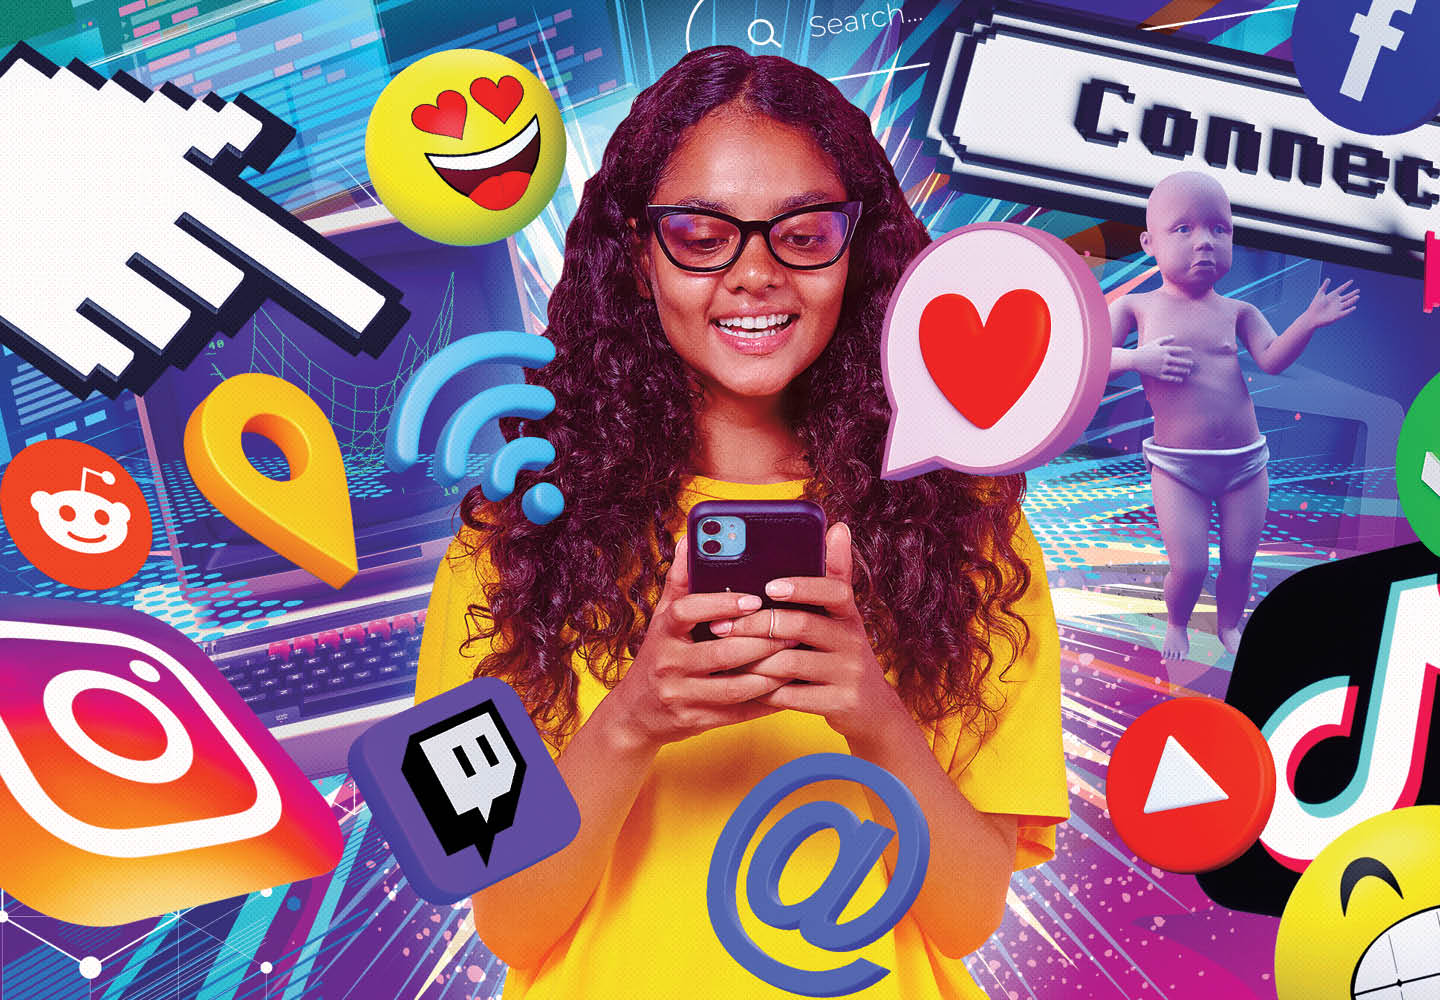 Image of a teen using phone while surrounded by different icons and emojis